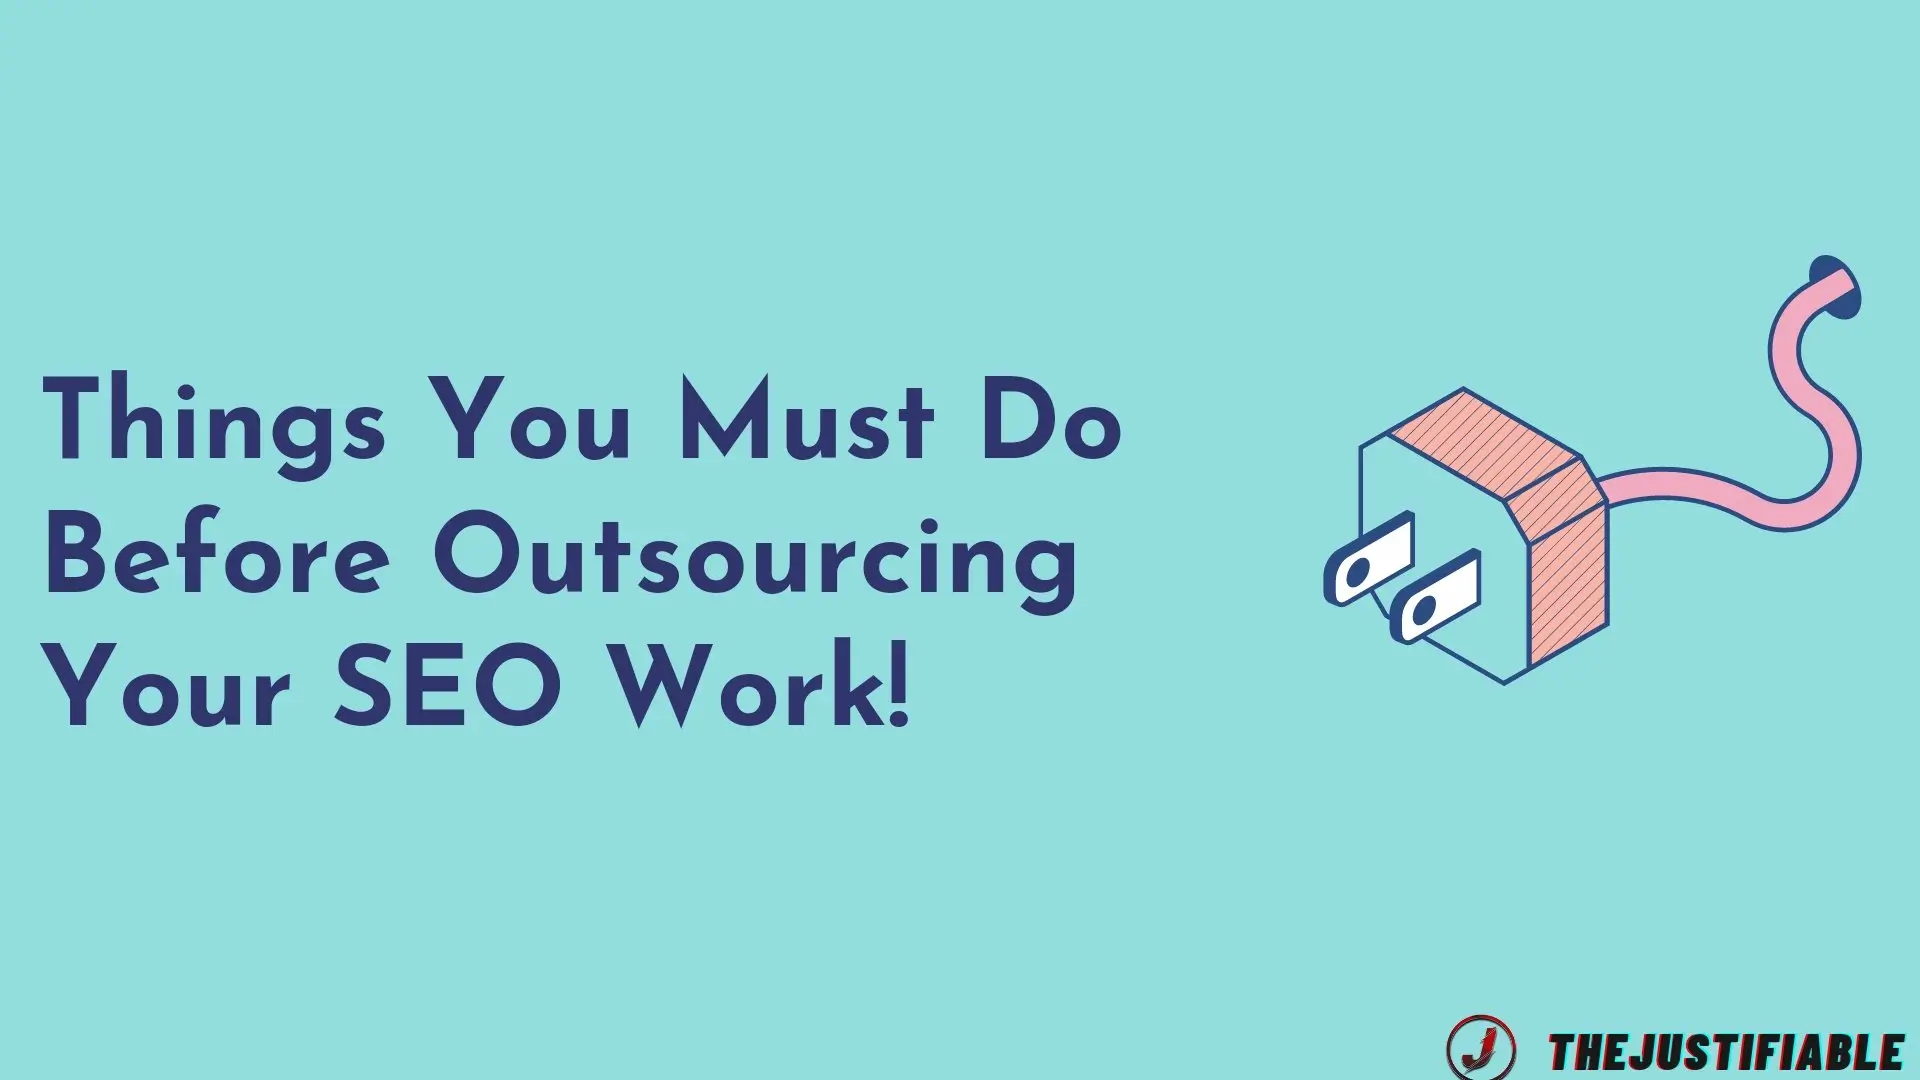 The image is a graphic related to: Outsourcing Your SEO Work!